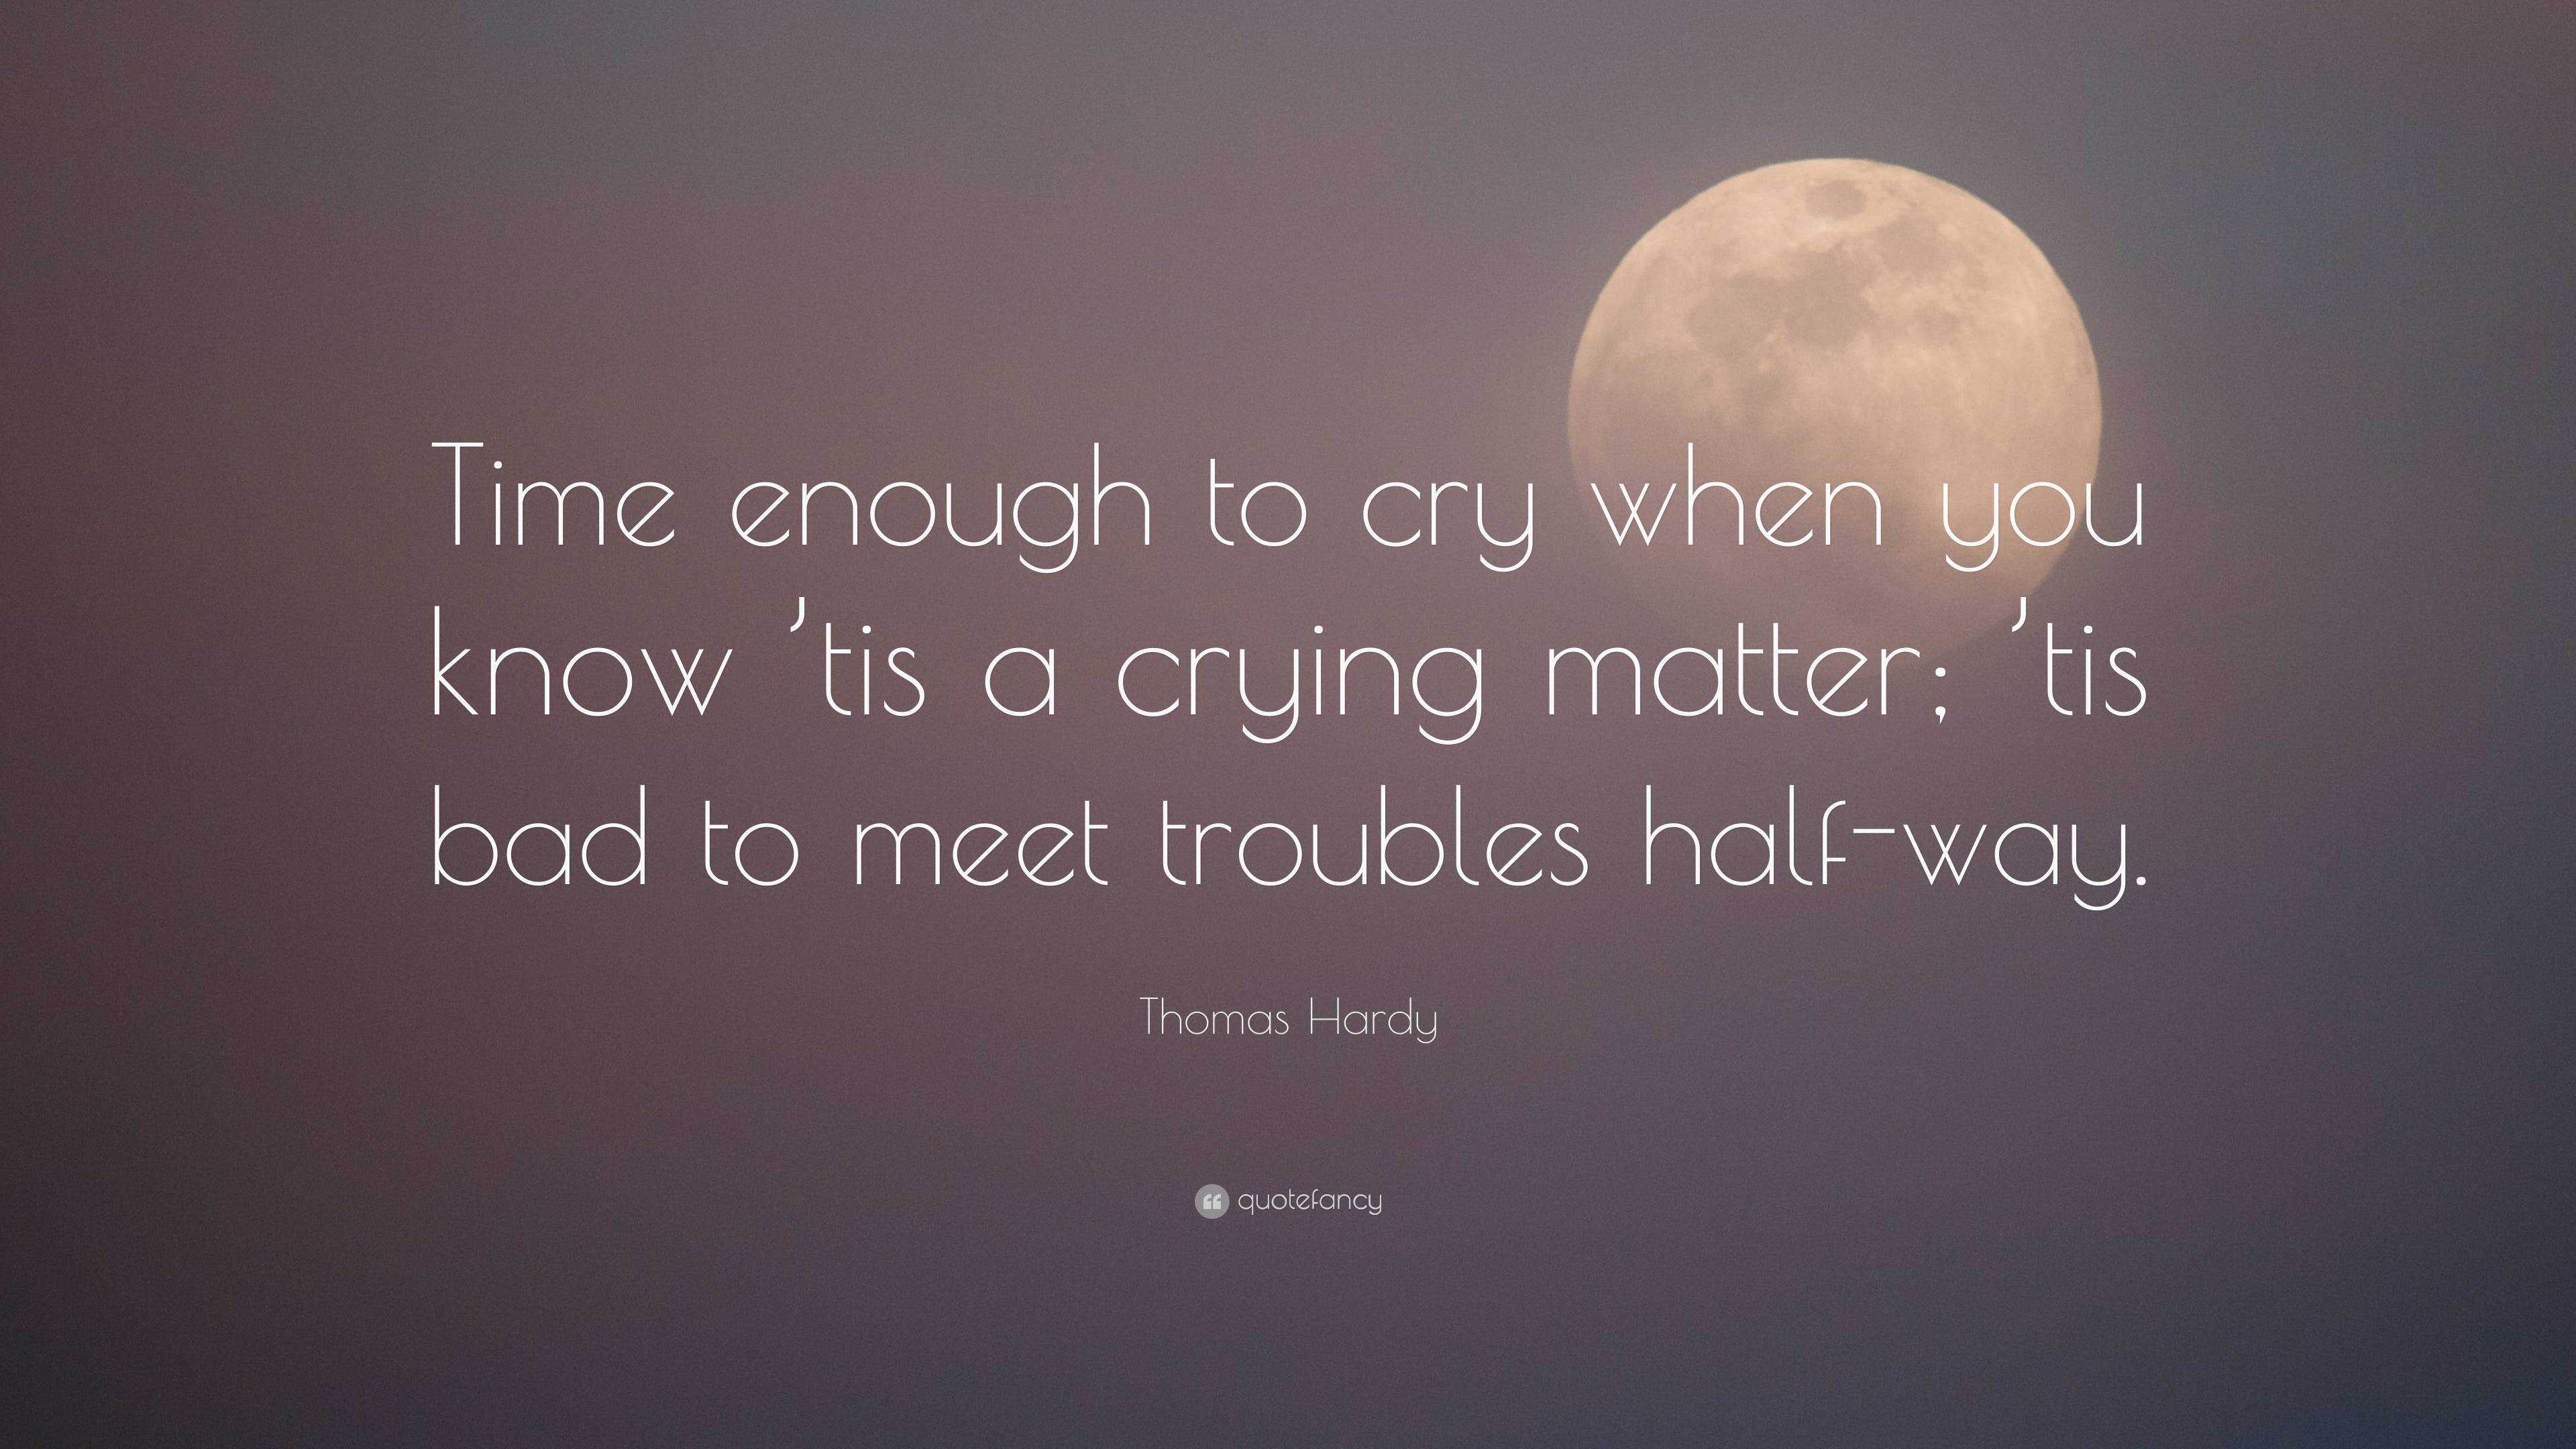 Thomas Hardy Quote: “Time enough to cry when you know ’tis a crying ...